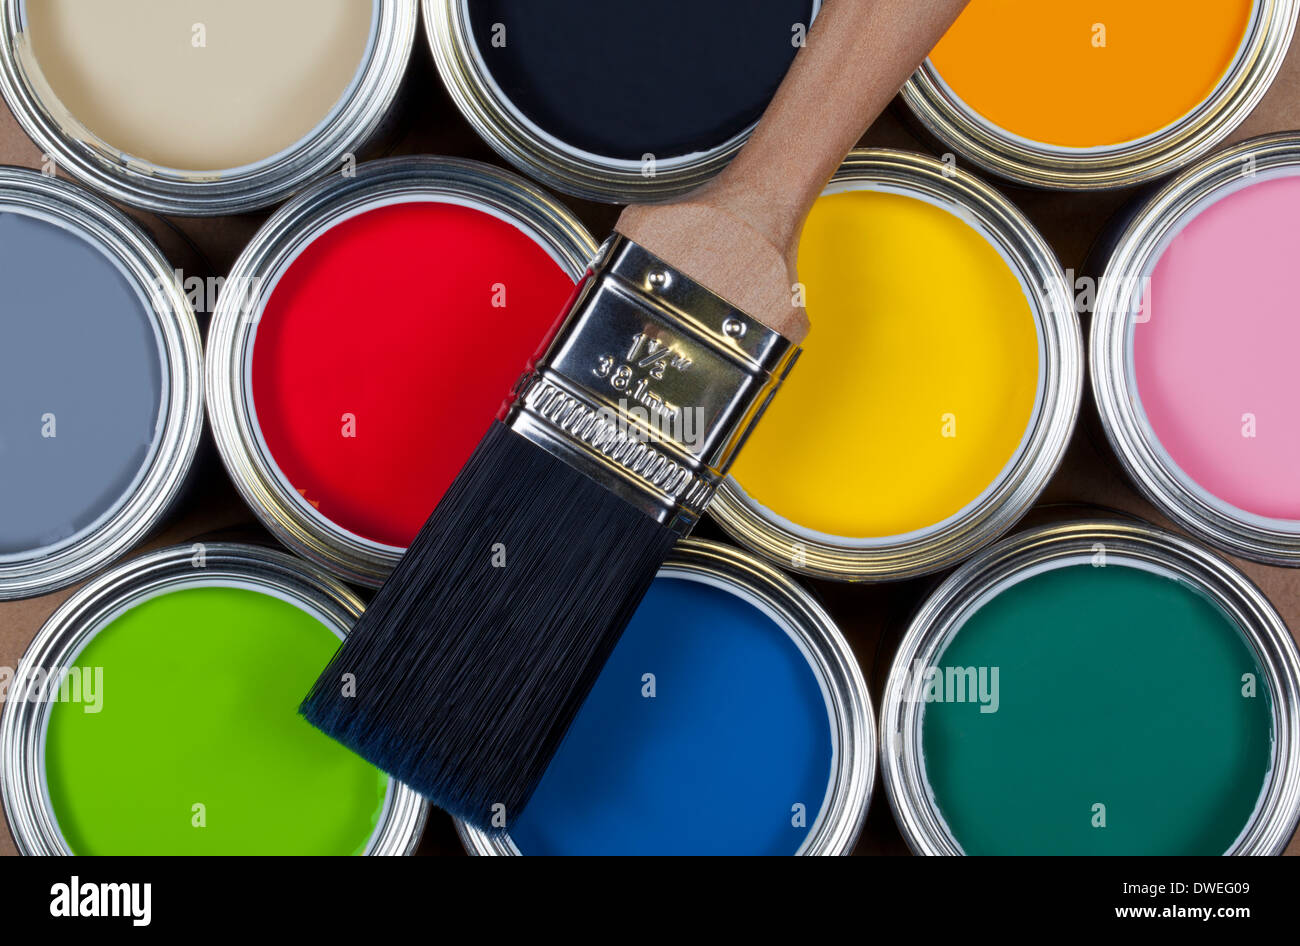 Blue Paint Can Front Large Group Empty Paint Cans Stock Photo by